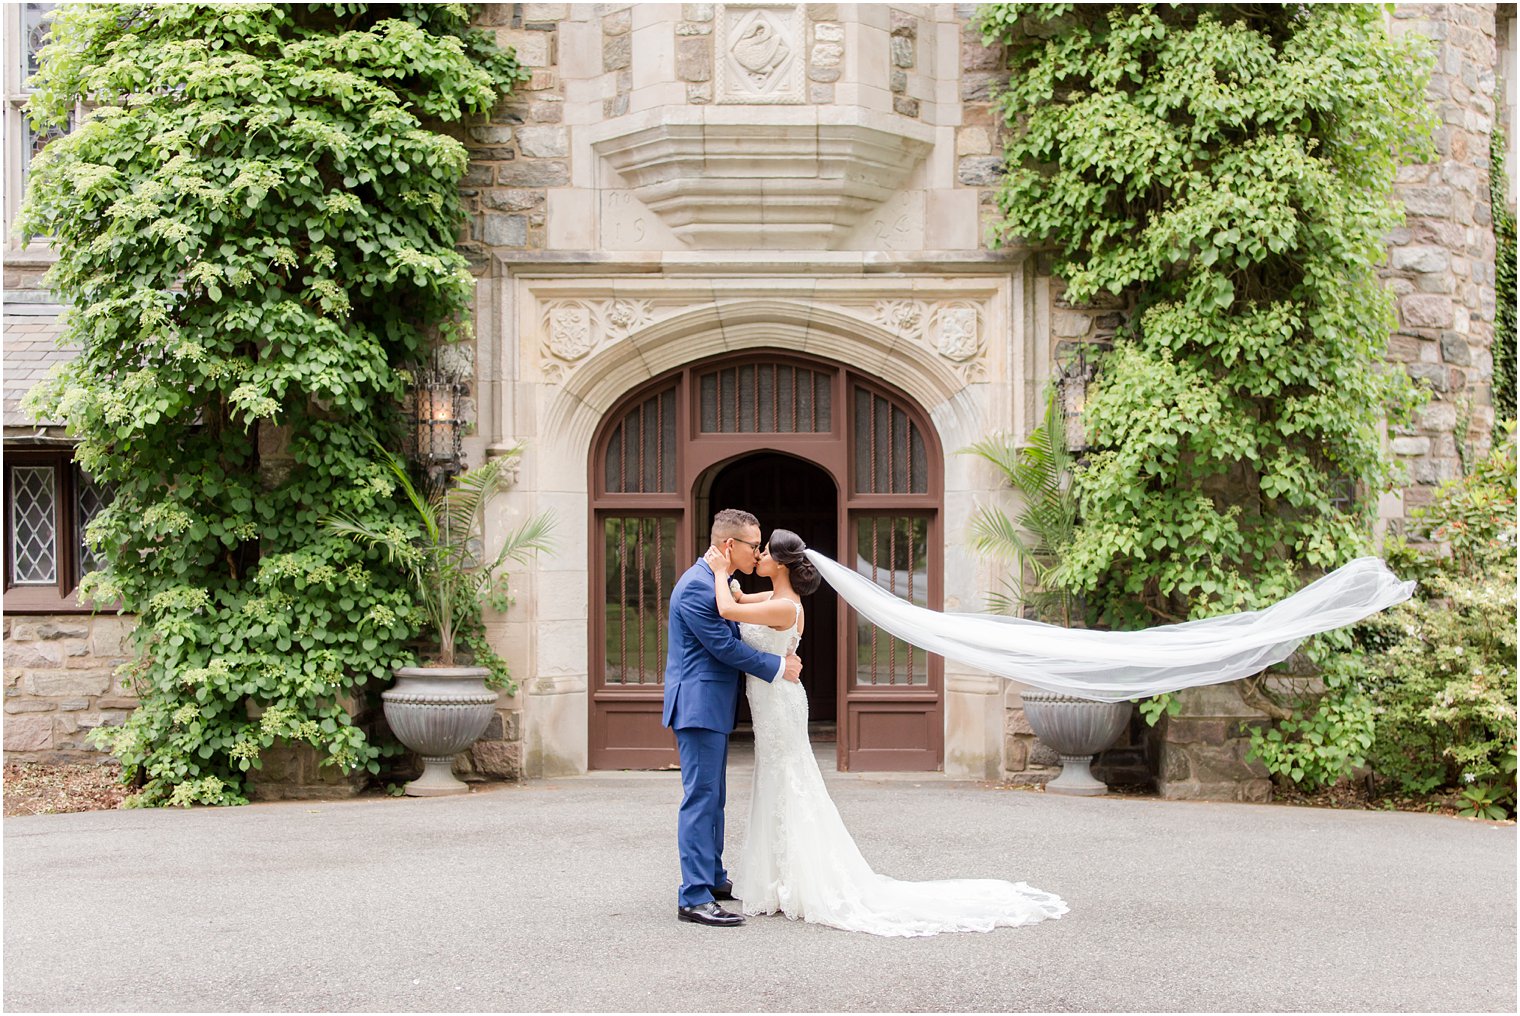 romantic photo of bride and groom | The Castle at Skylands Manor Wedding Photos by Idalia Photography